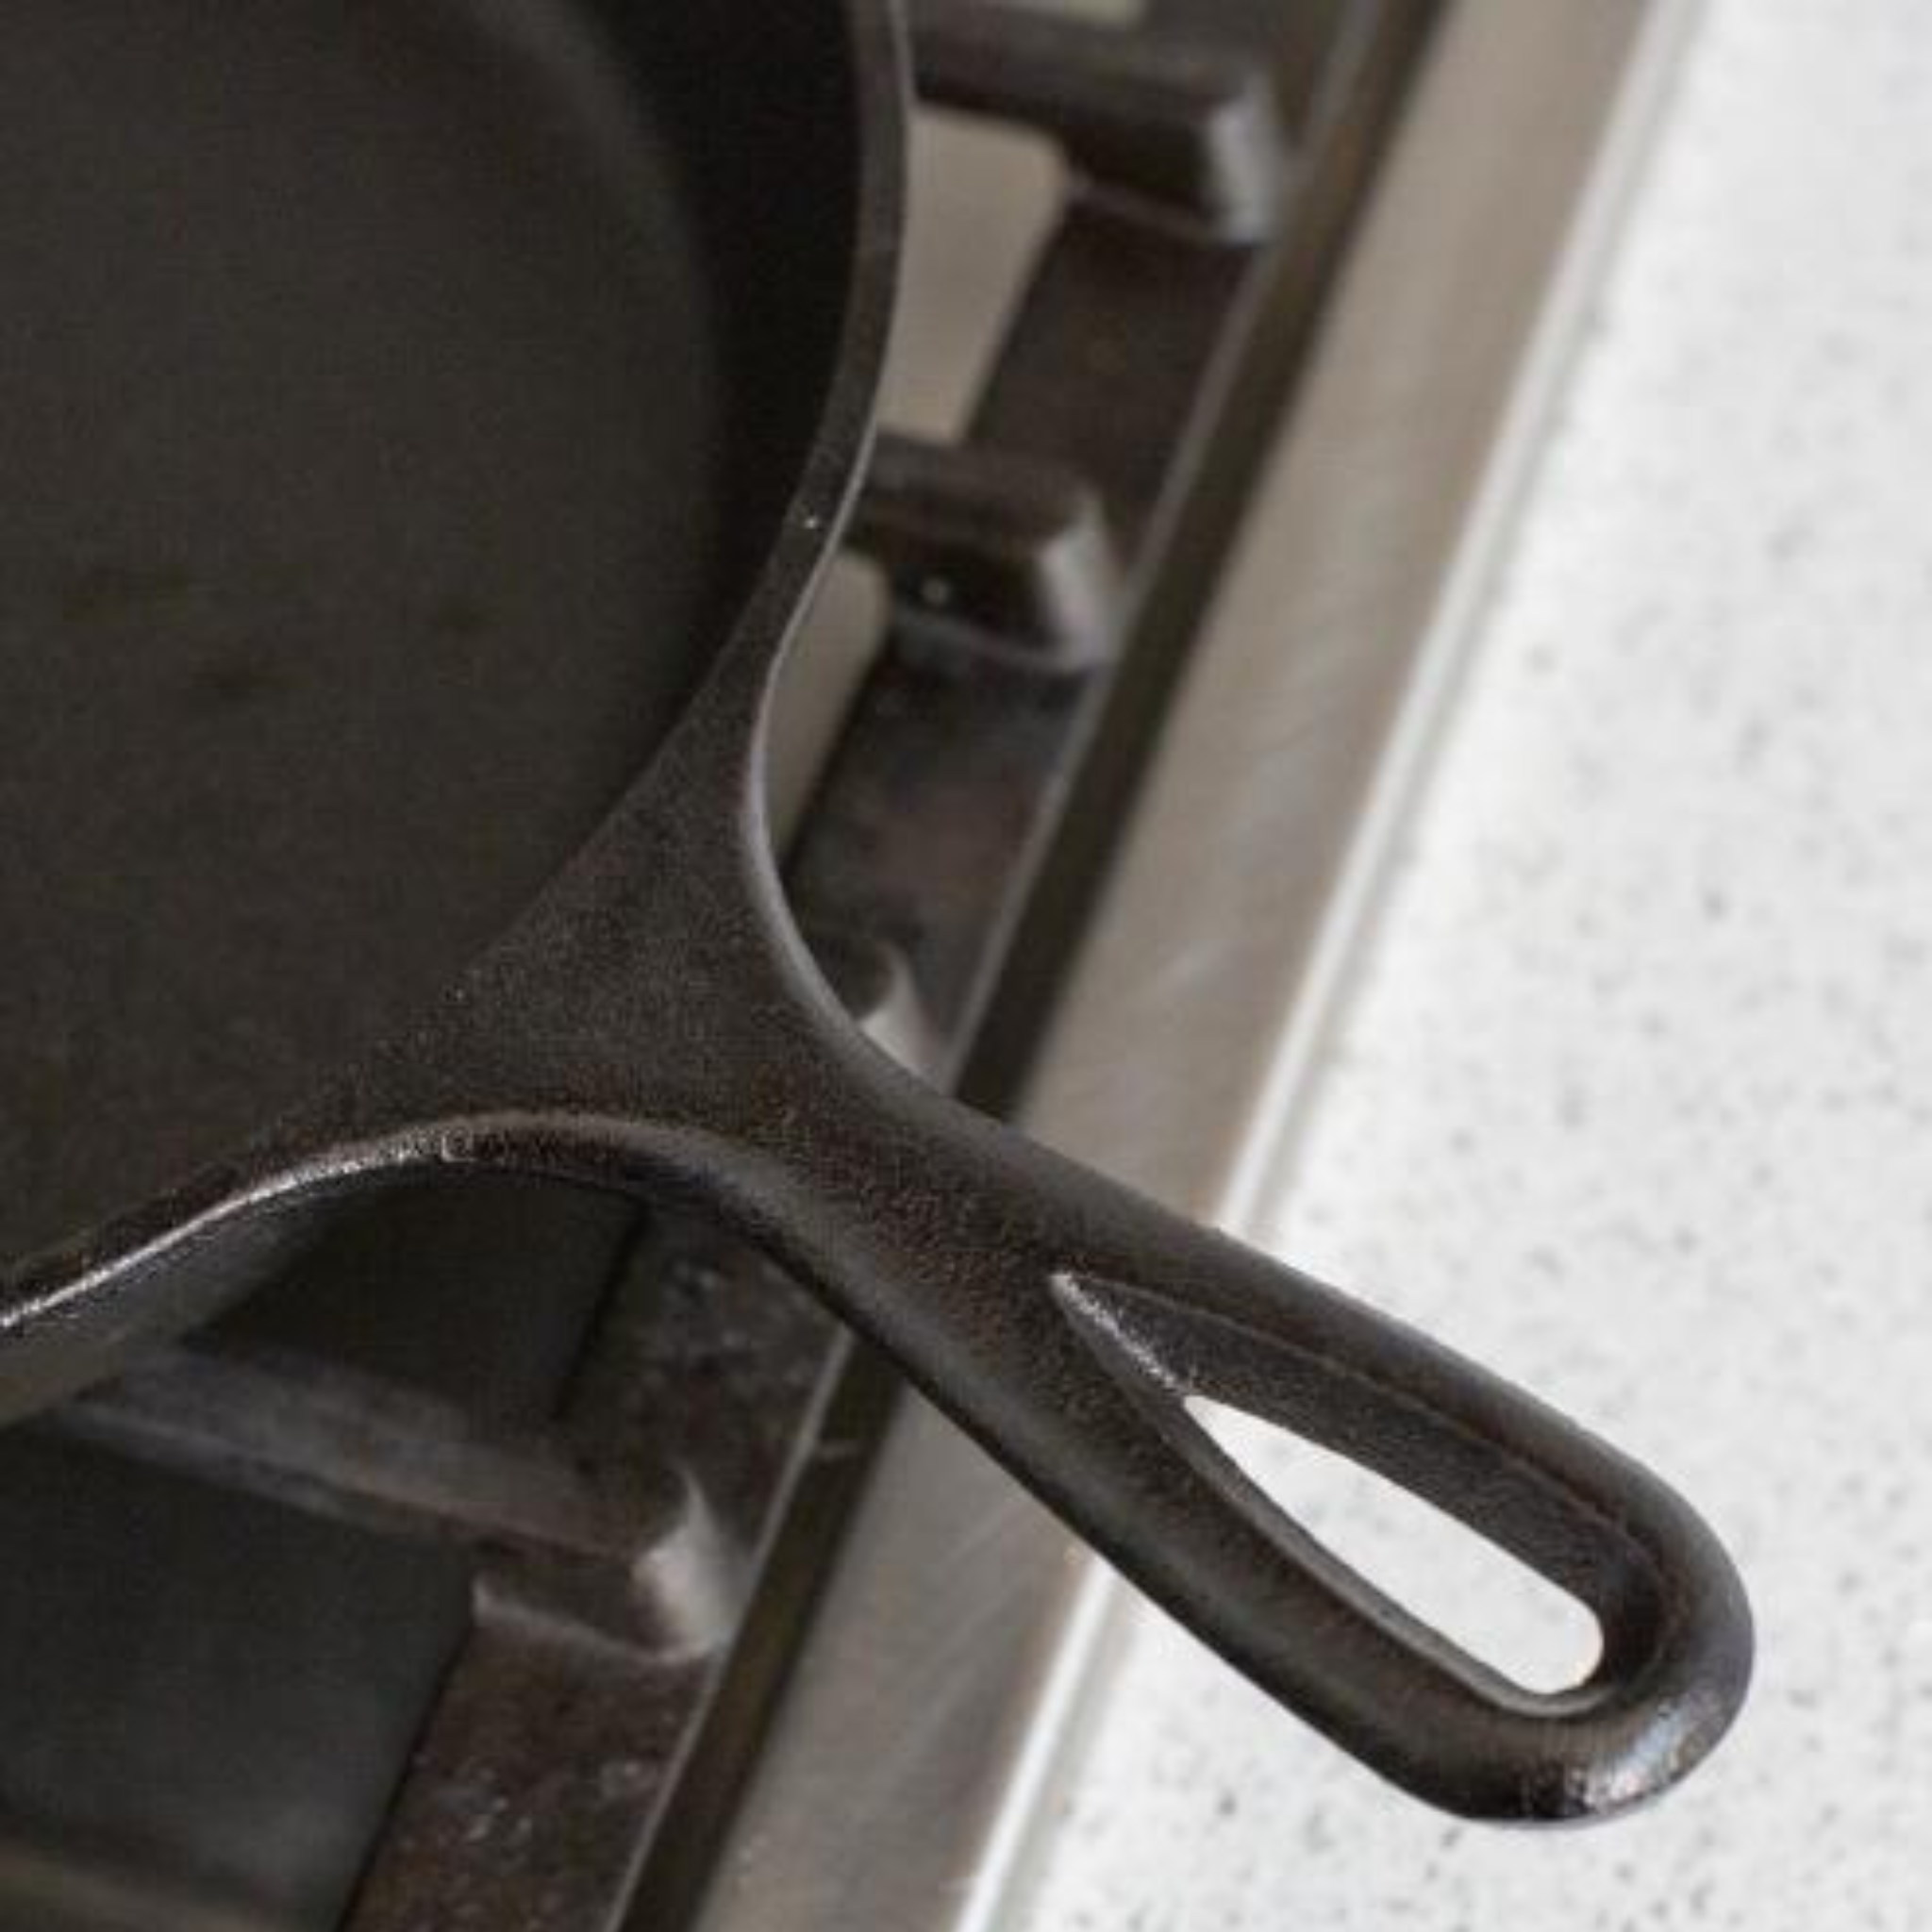 Lodge Cast Iron: A Step-by-Step Guide to Re-Seasoning